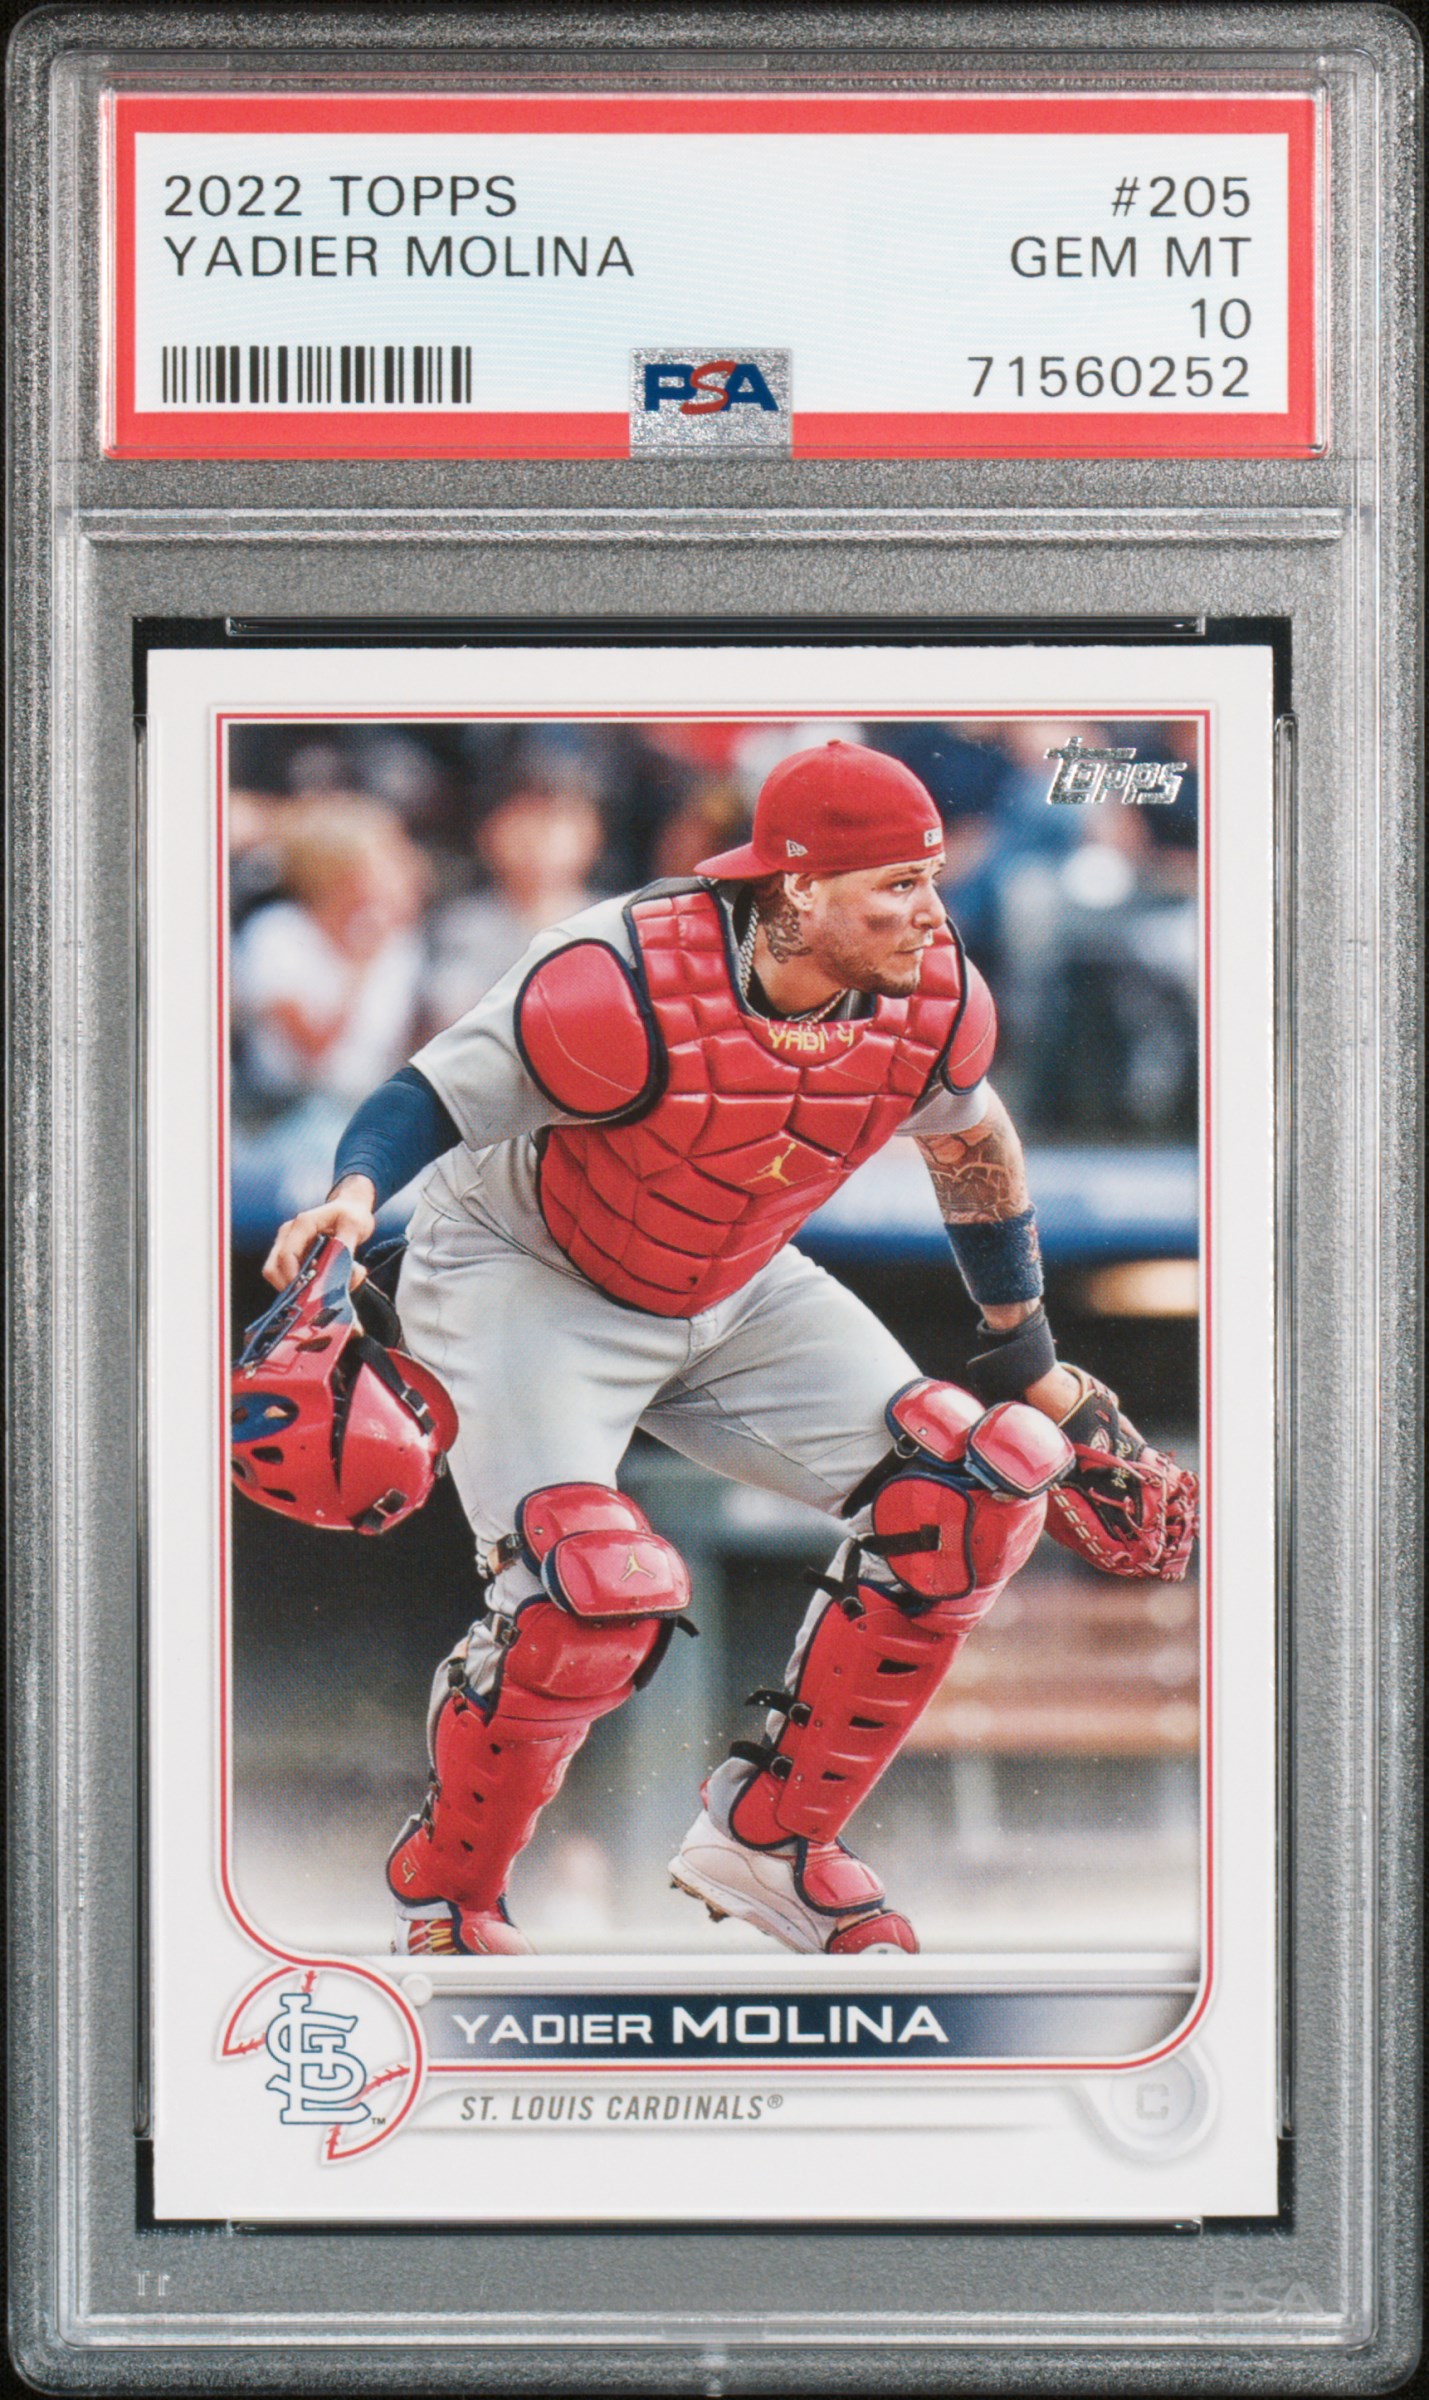 St. Louis Cardinals 2013 Topps OPENING DAY Team Set with Adam